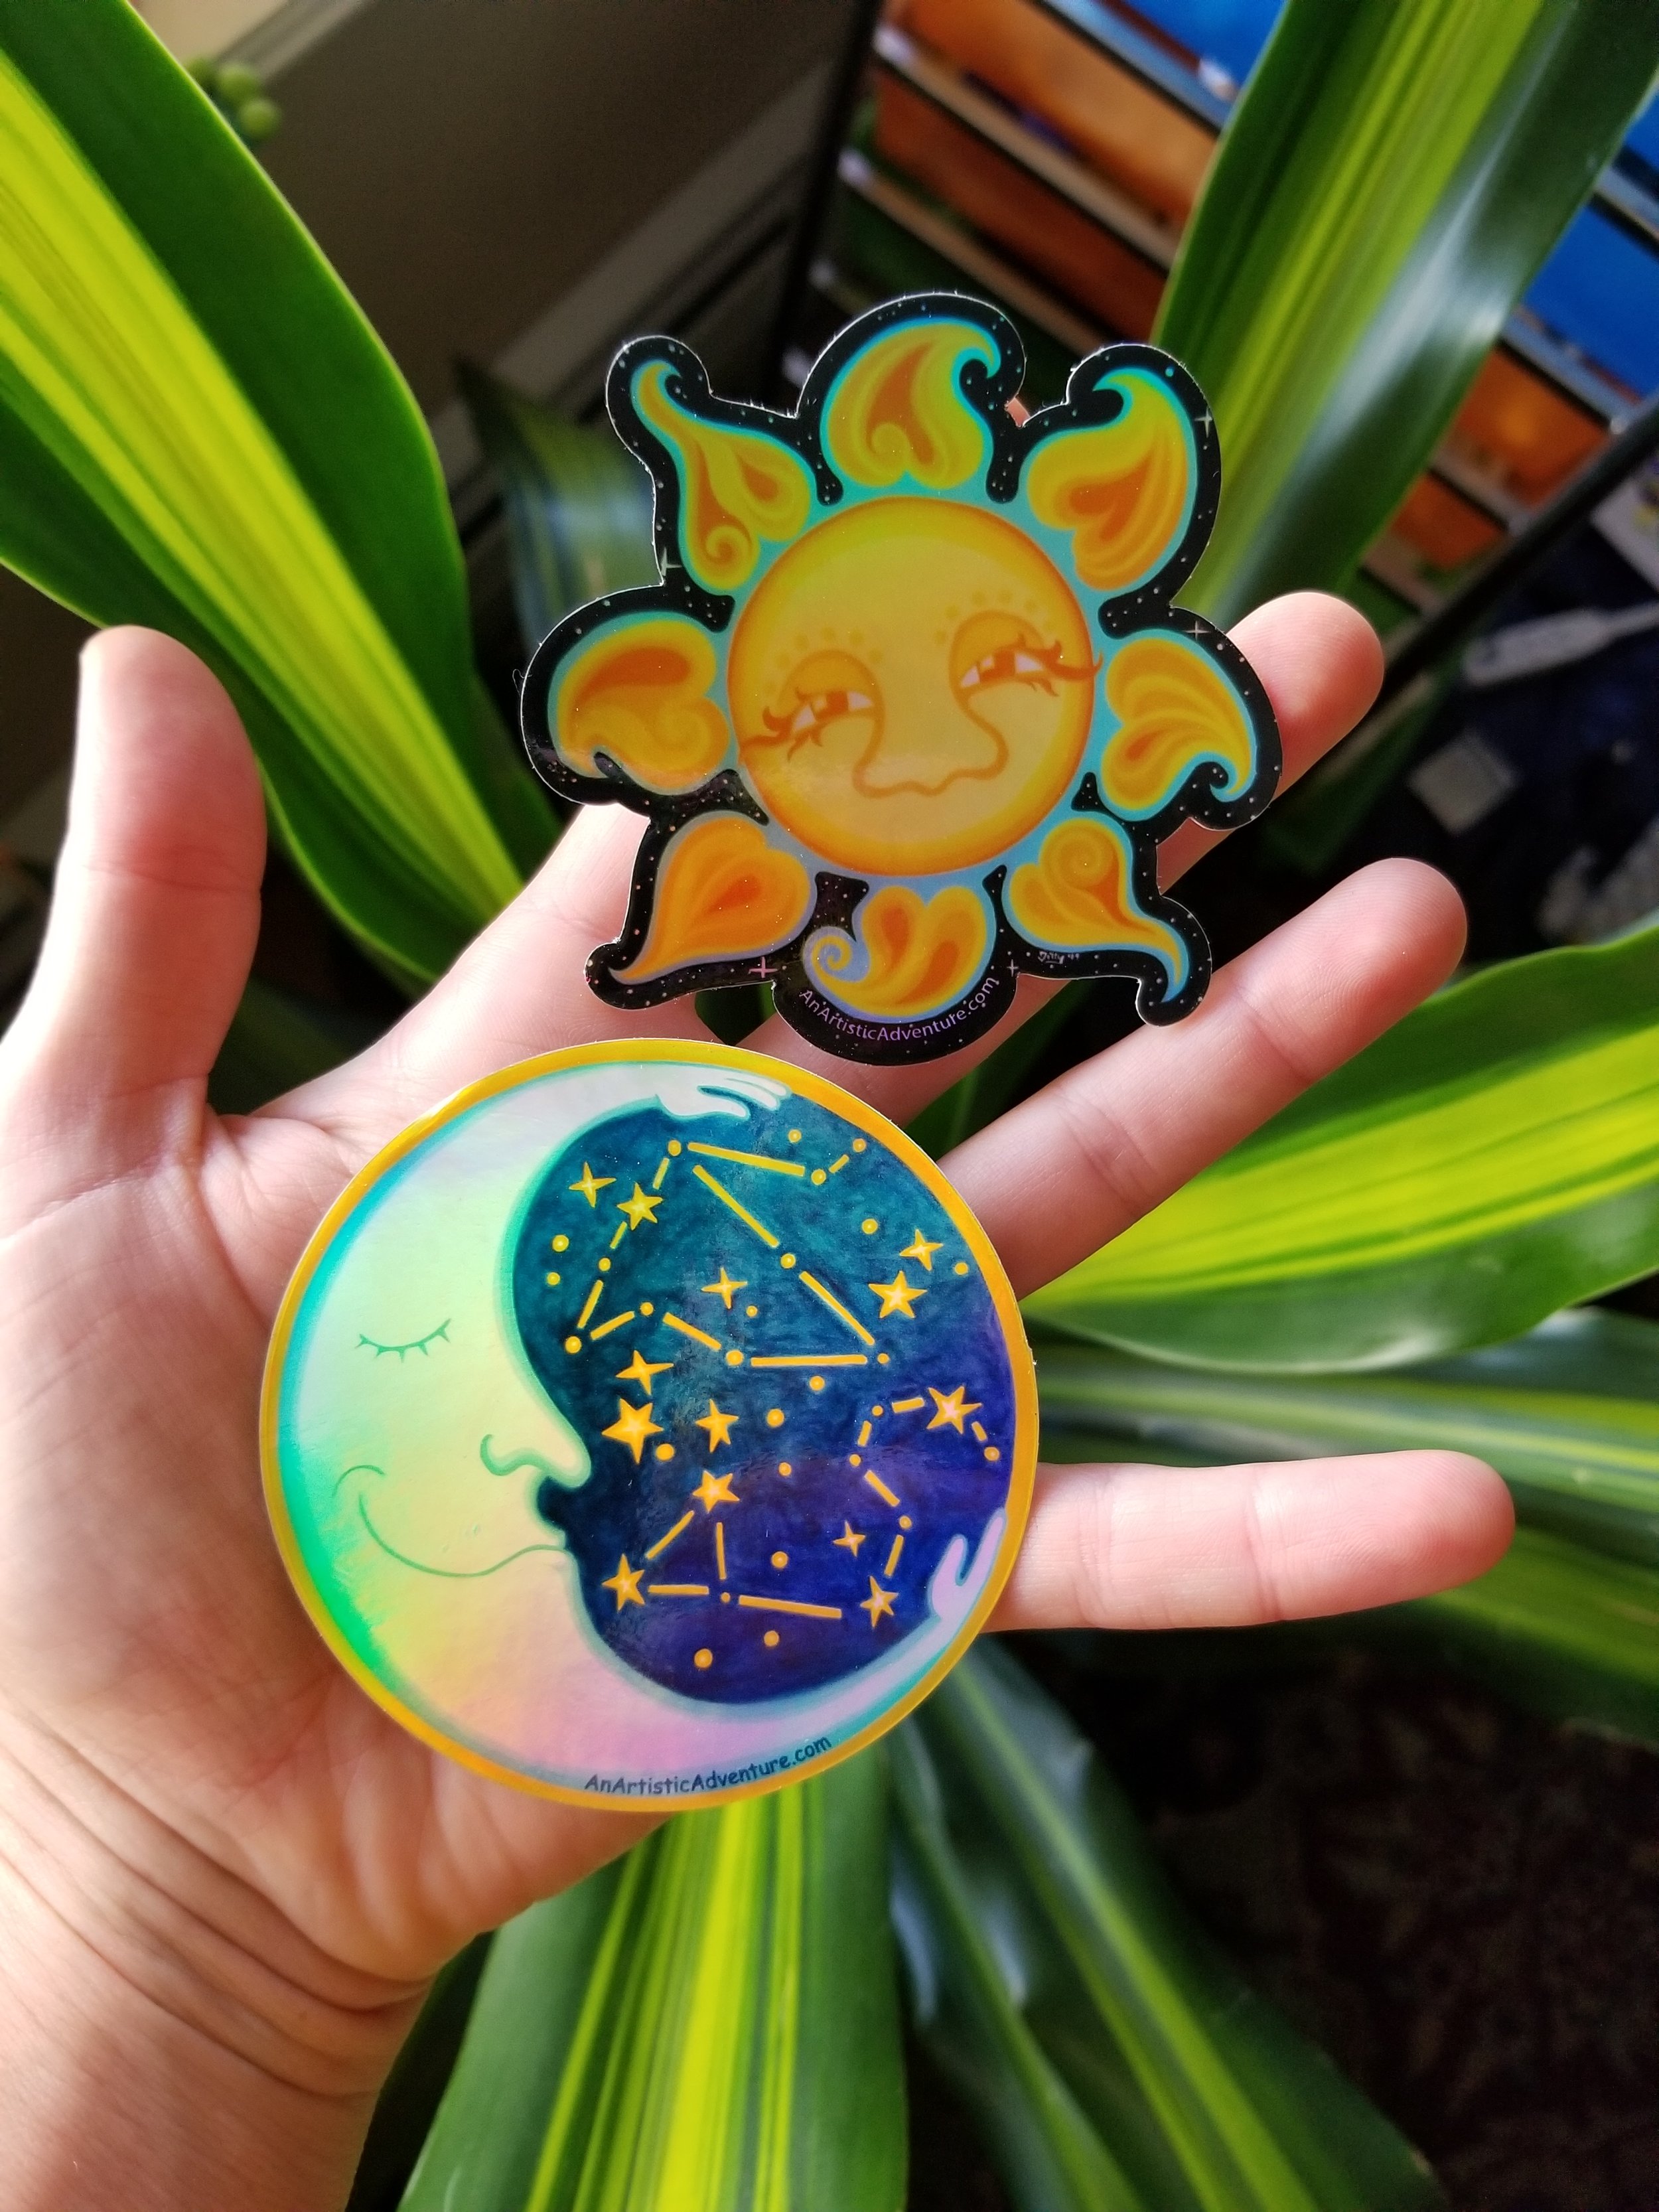 holographic-sun-and-moon-sticker-buy-stickers-from-independent-artists-unique-artisan-stickers.jpg